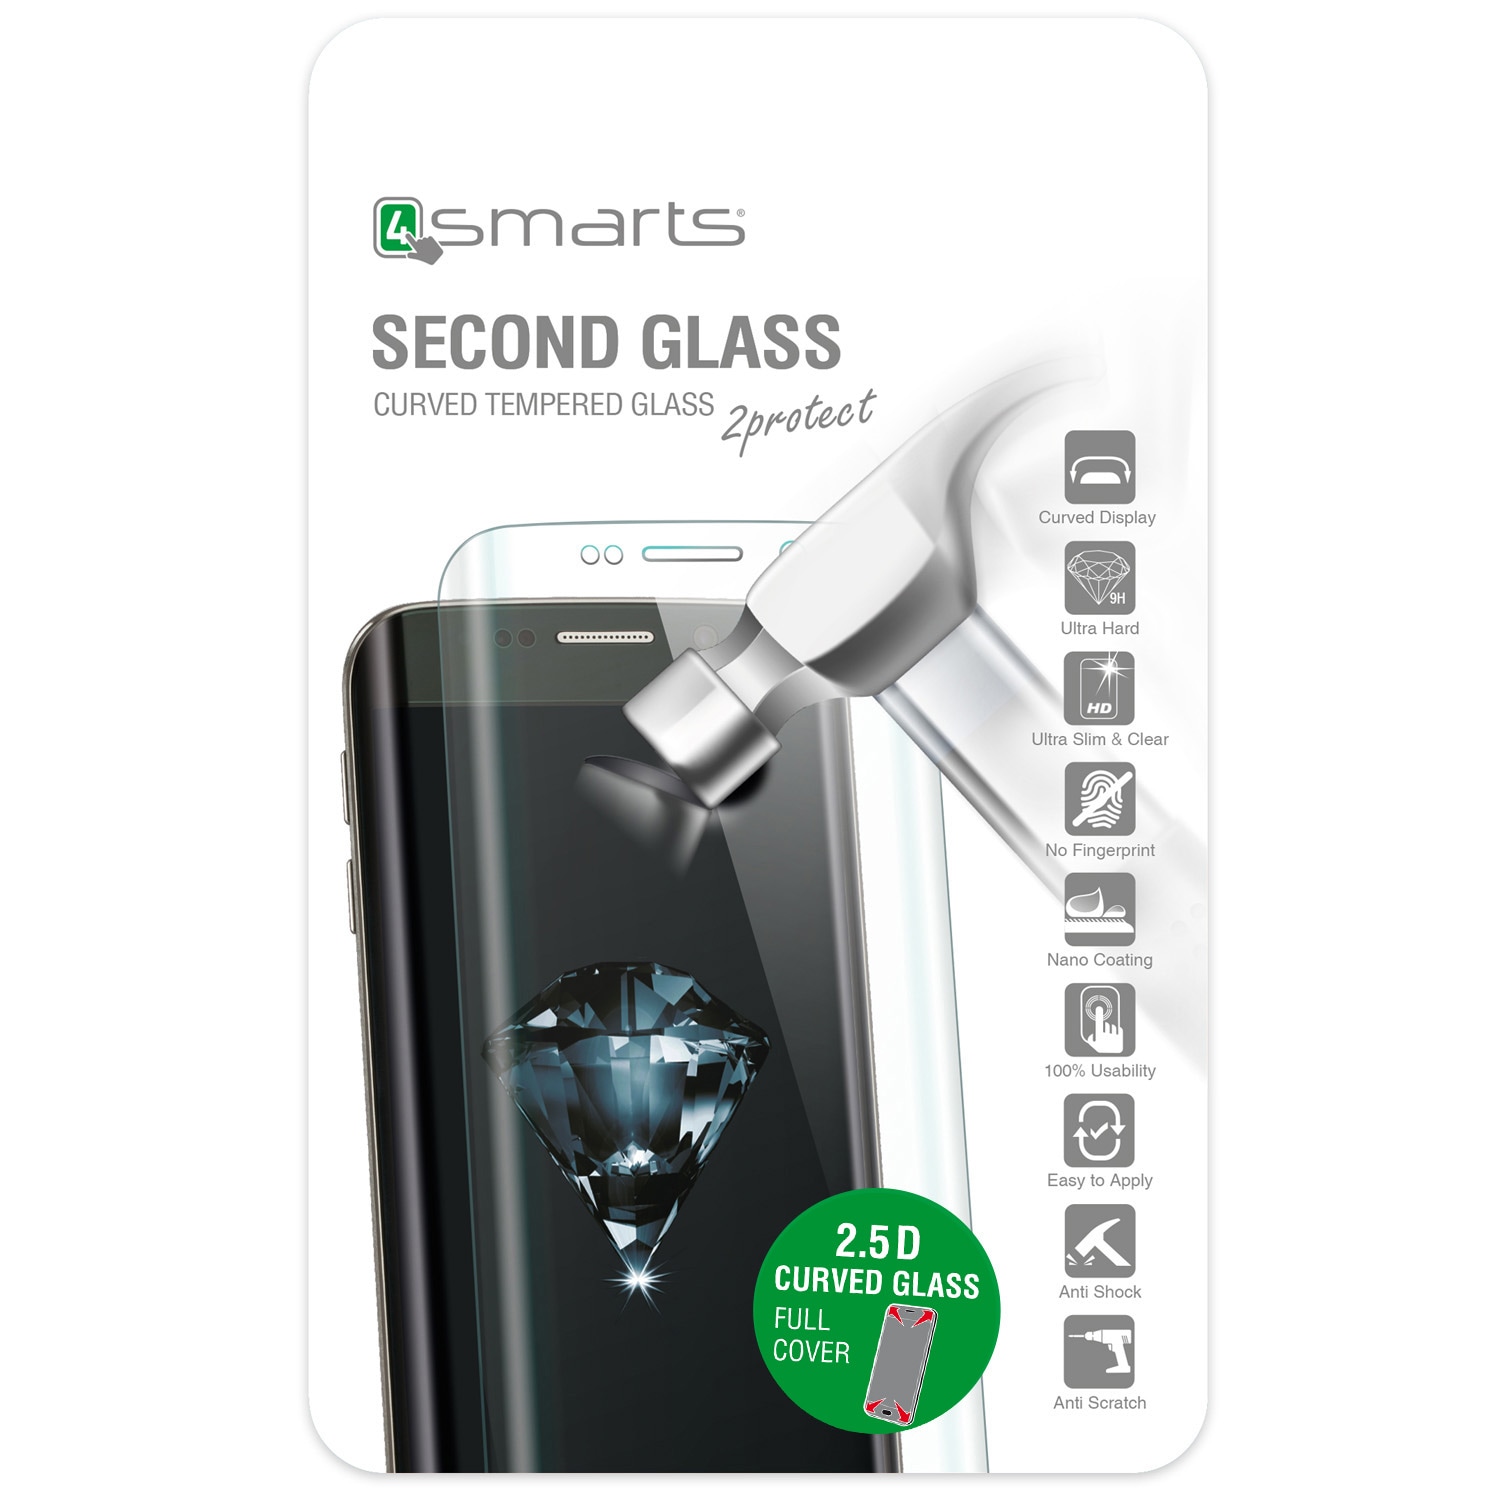 4smarts Second Glass Curved 2.5D iPhone 6 / 6S - Hopea